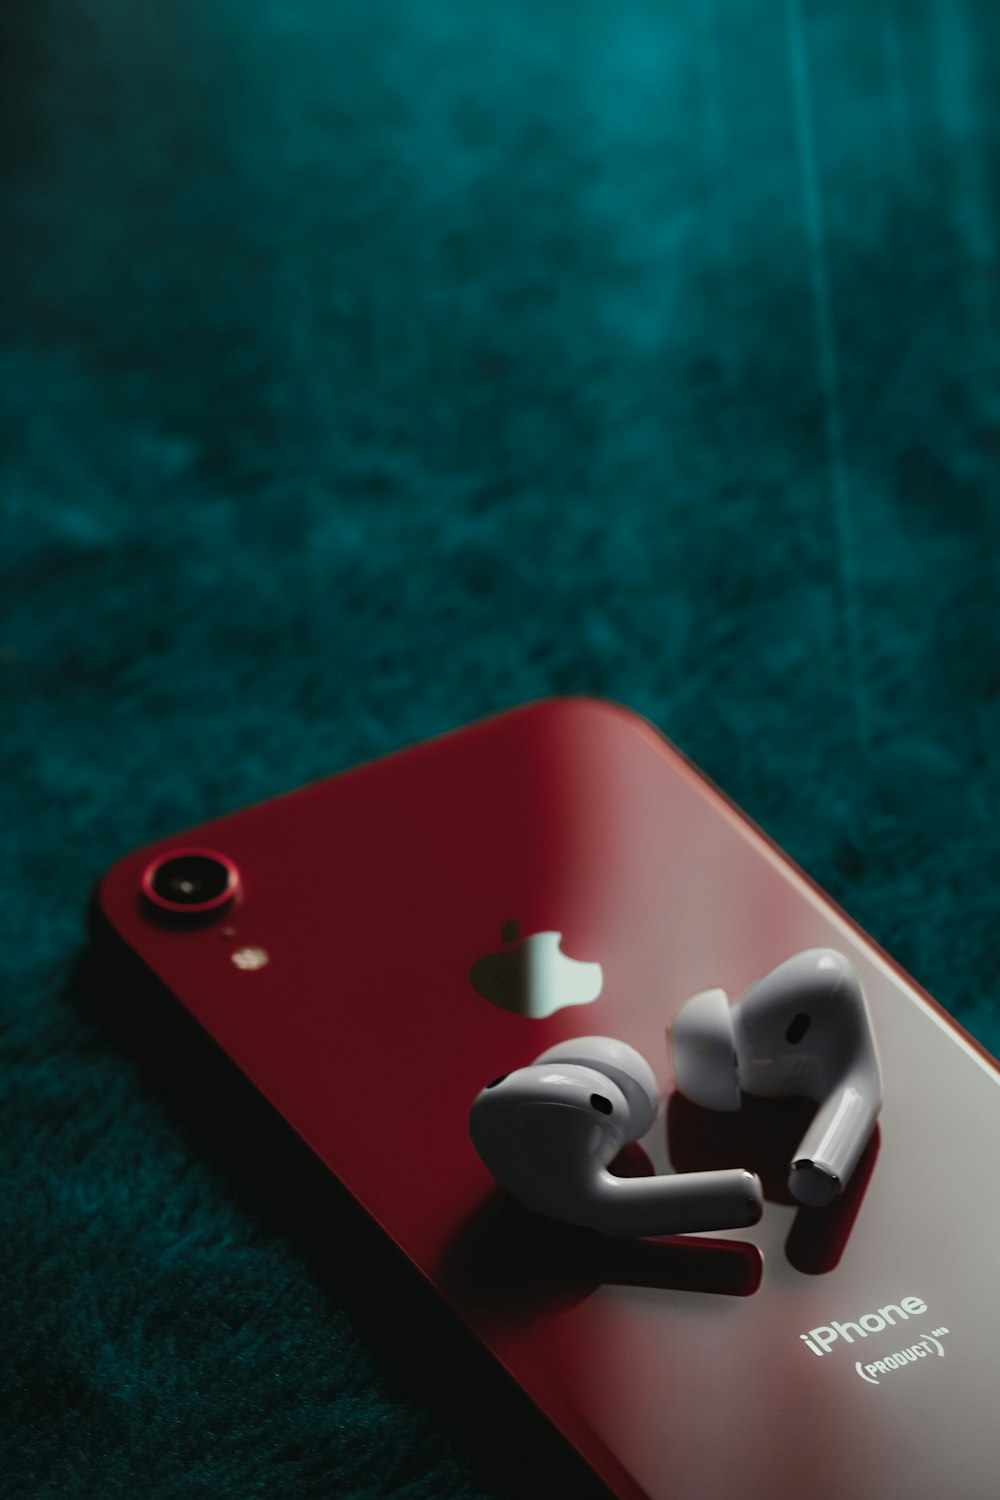 white earbuds on red iphone case